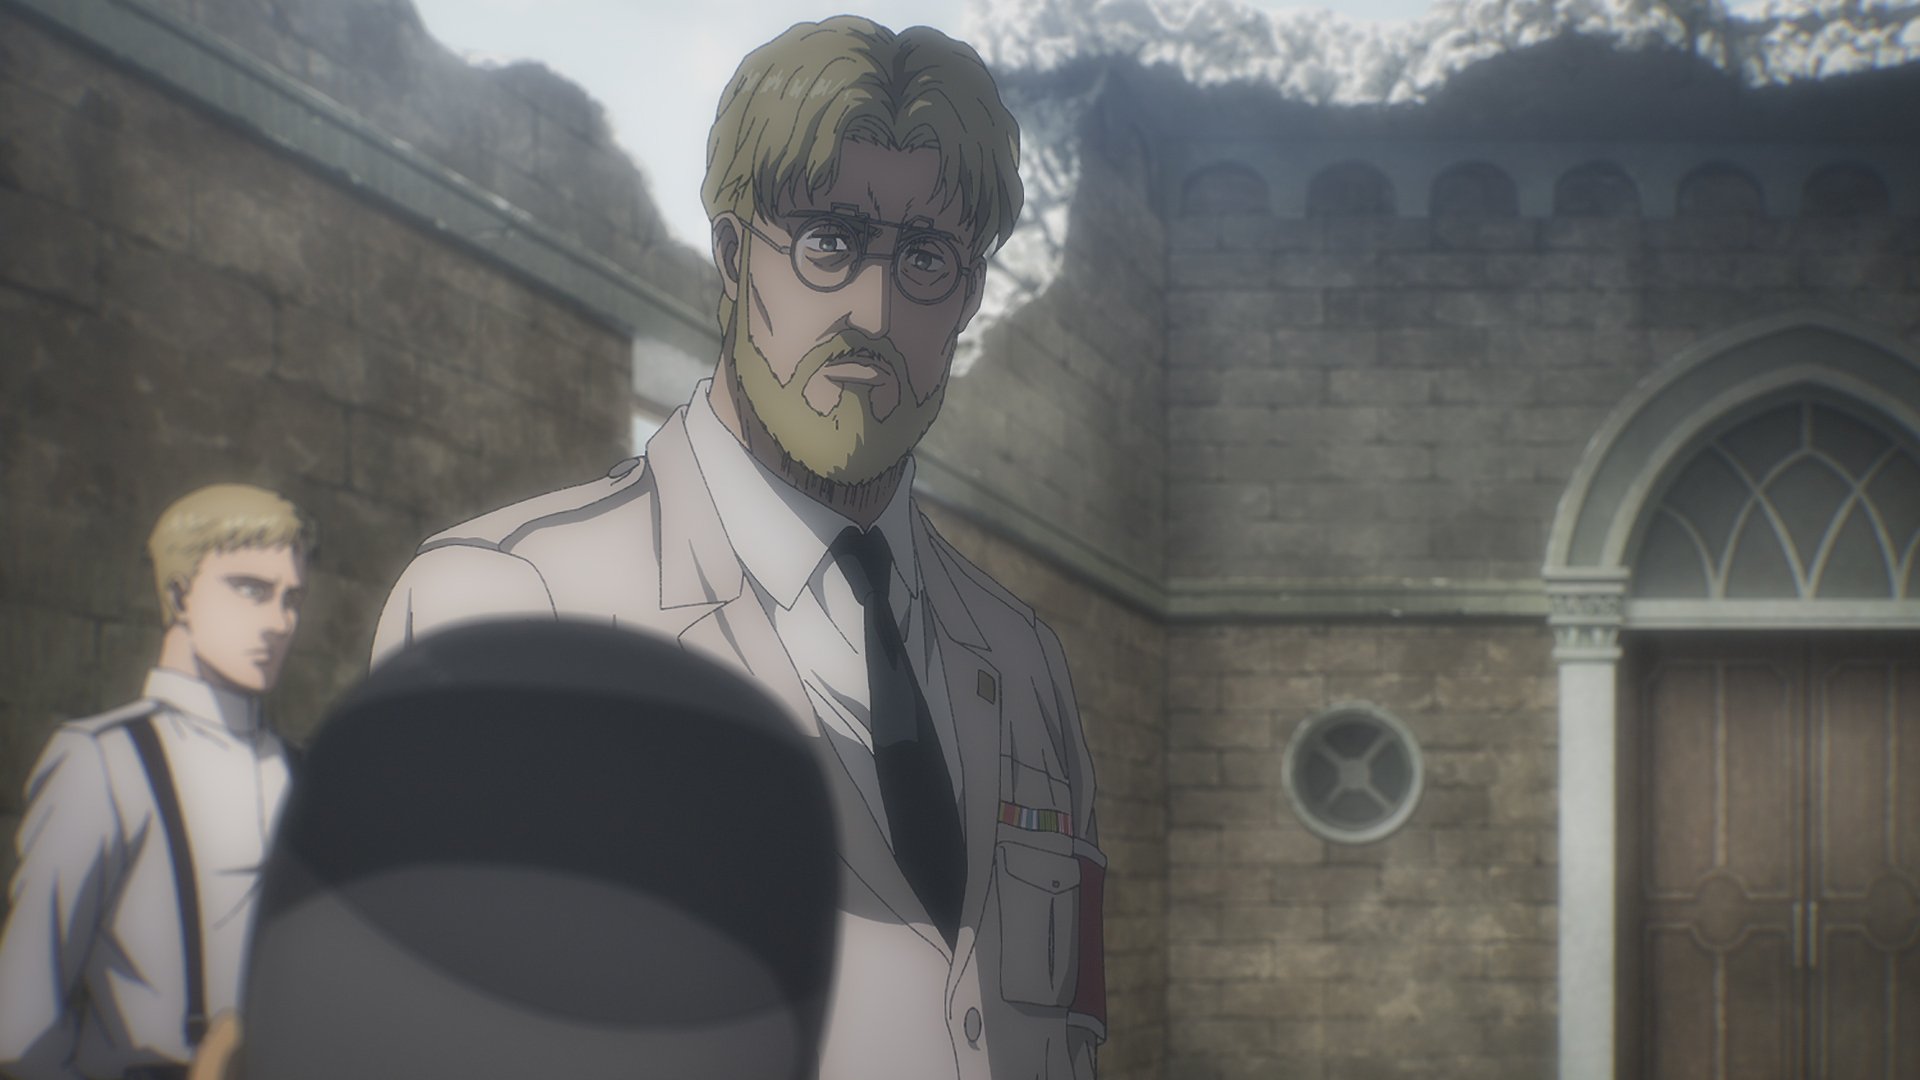 Zeke Jaeger in 'Attack on Titan' Season 4 Part 1. He's wearing glasses and a beige uniform.